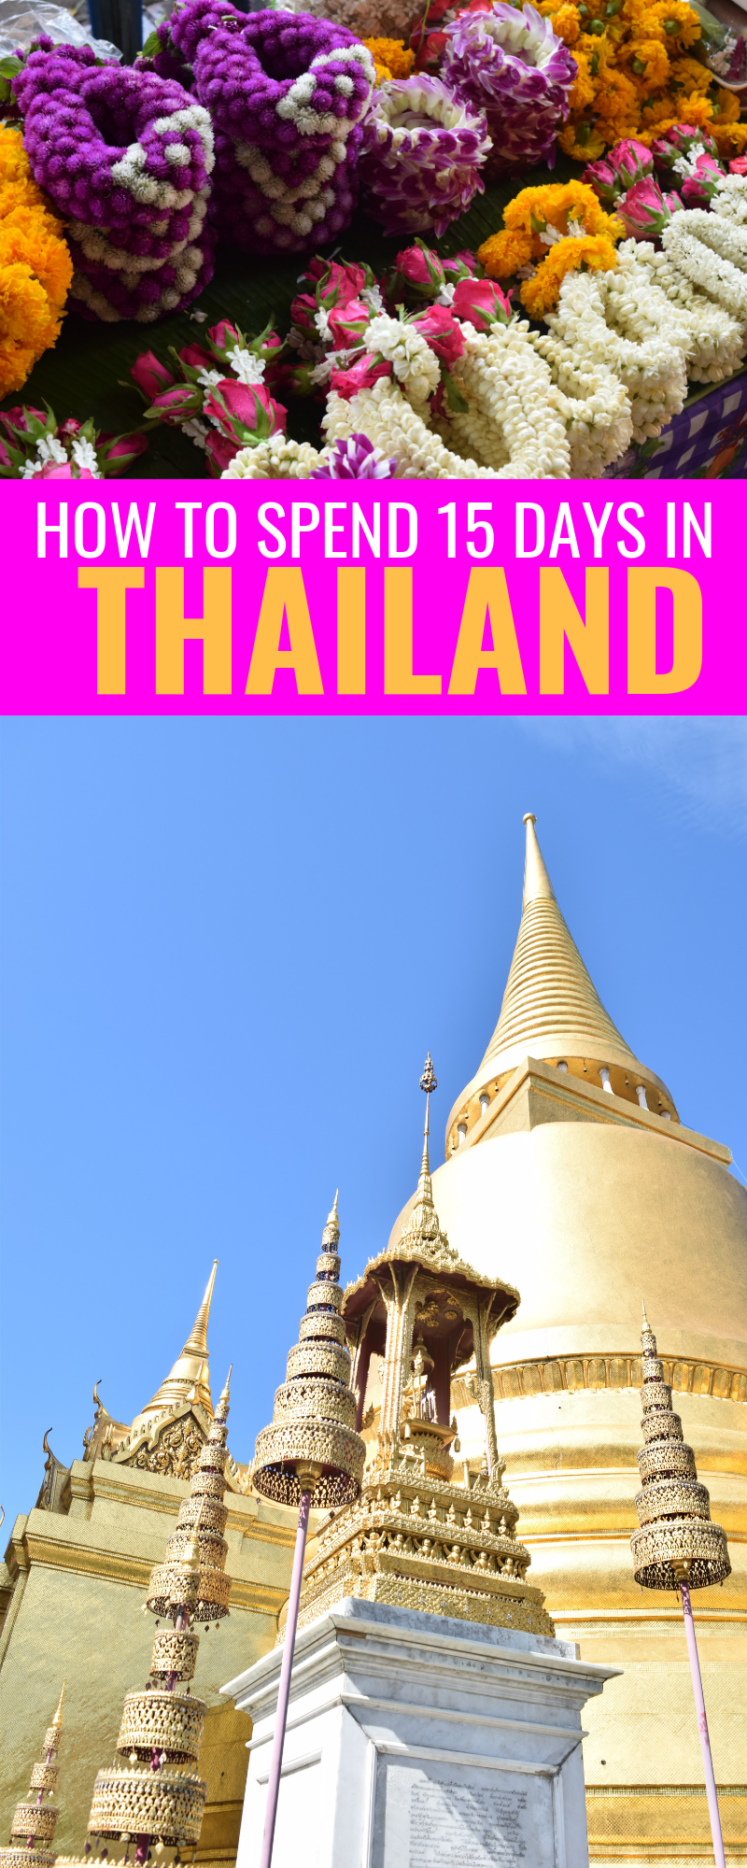 How To Spend 15 Days In Thailand